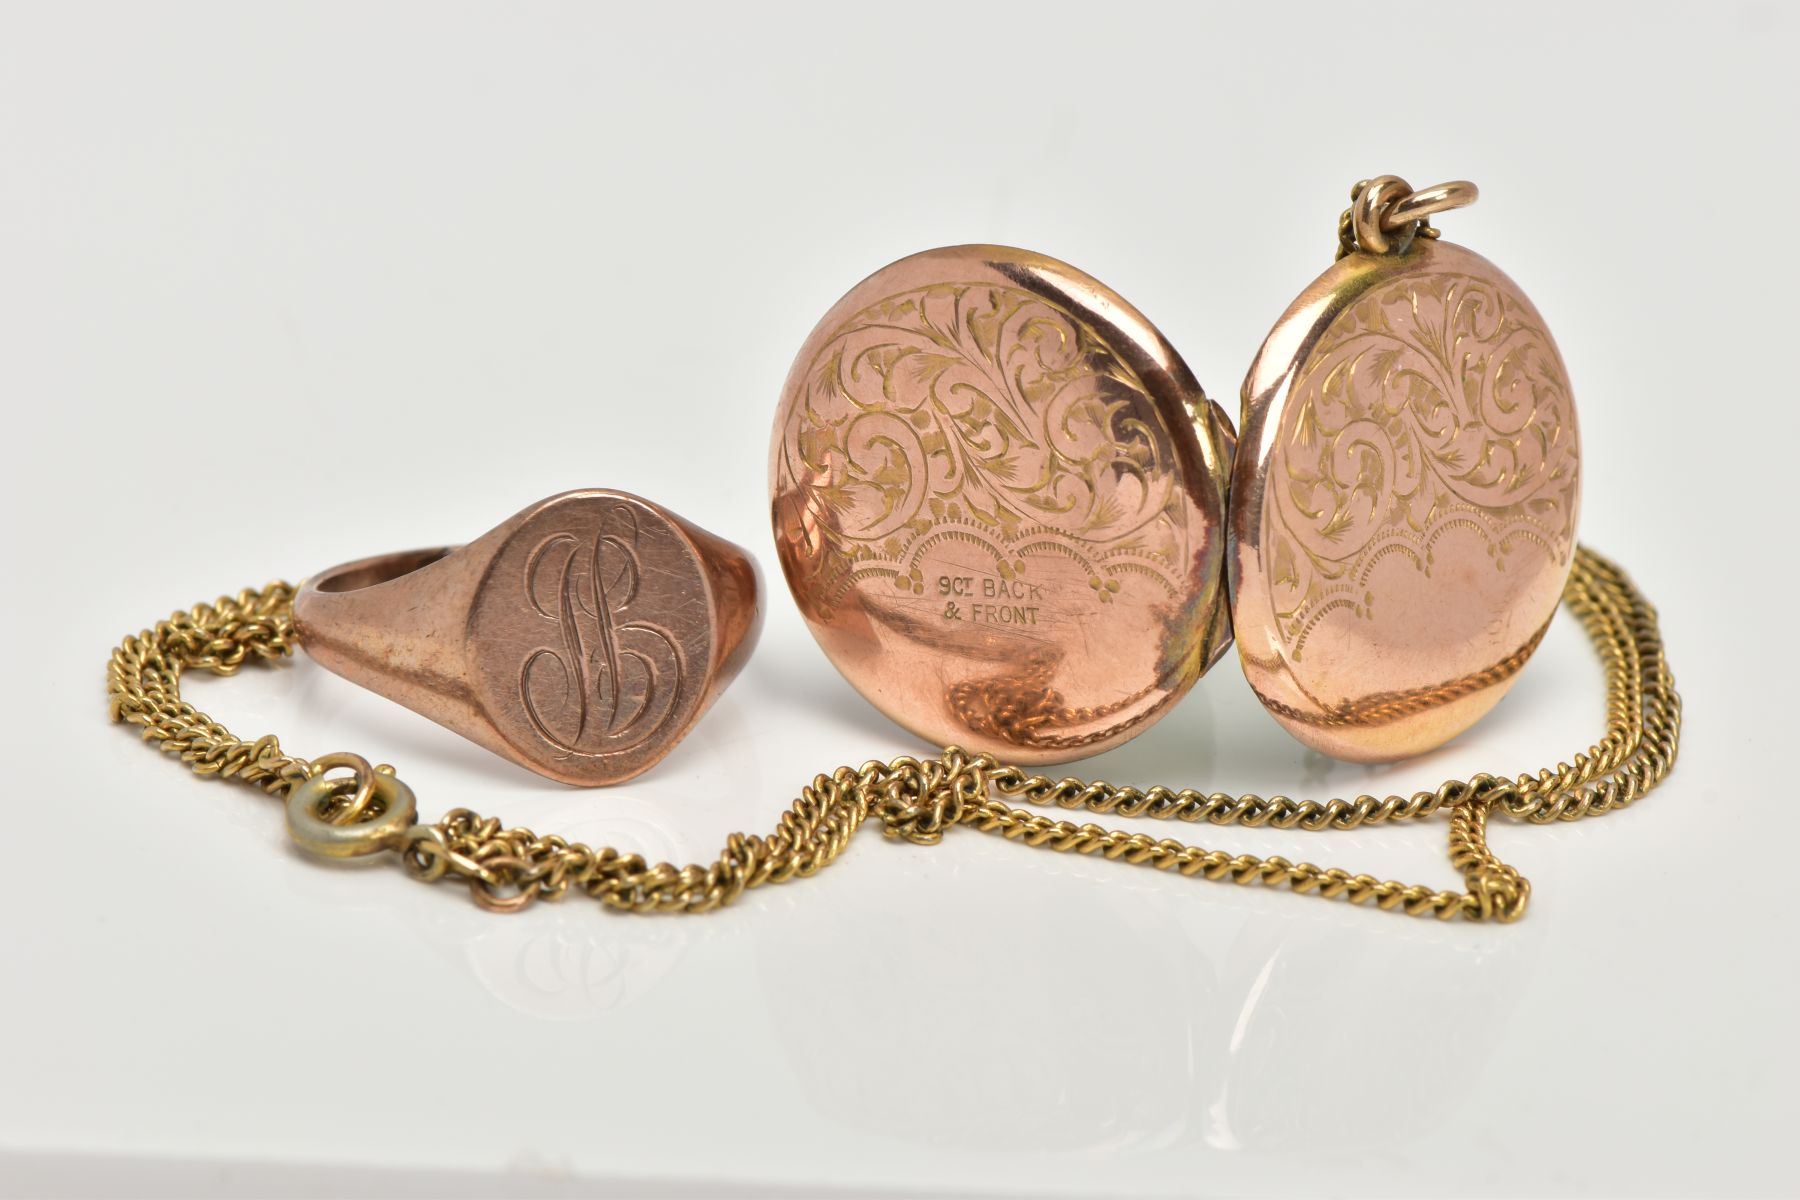 A 9CT GOLD SIGNET RING AND YELLOW METAL LOCKET, an oval shaped signet ring, engraved with the letter